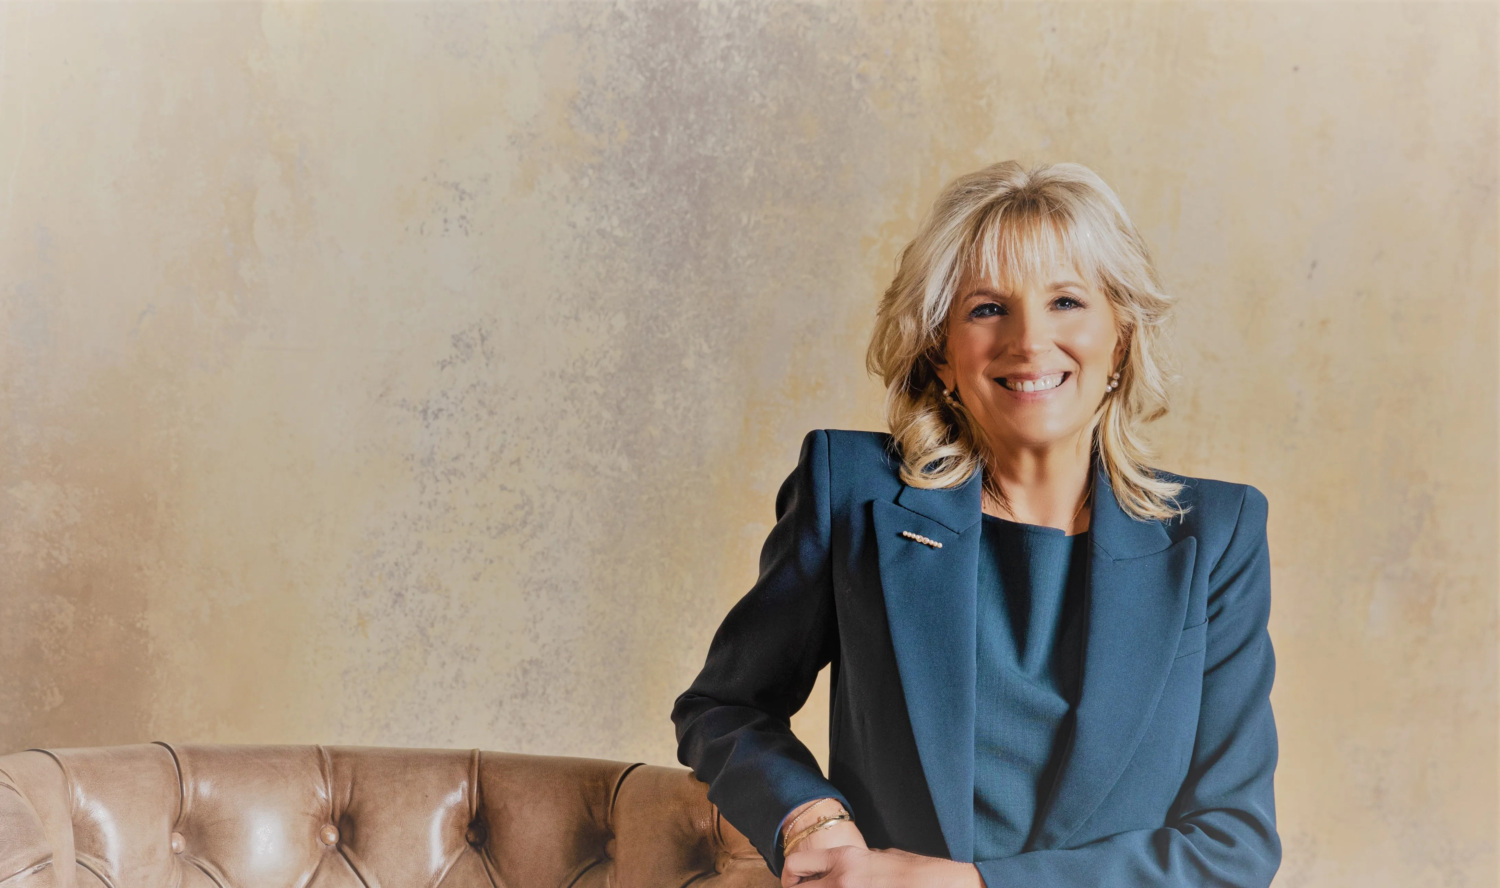 First Lady Dr. Jill Biden has shoulder-length blonde hair and smiles at the camera. She is seated on the arm of a brown leather sofa and wearing a blue suit with pearl earrings, a pearl brooch on her right lapel, and gold bracelets on her right wrist.